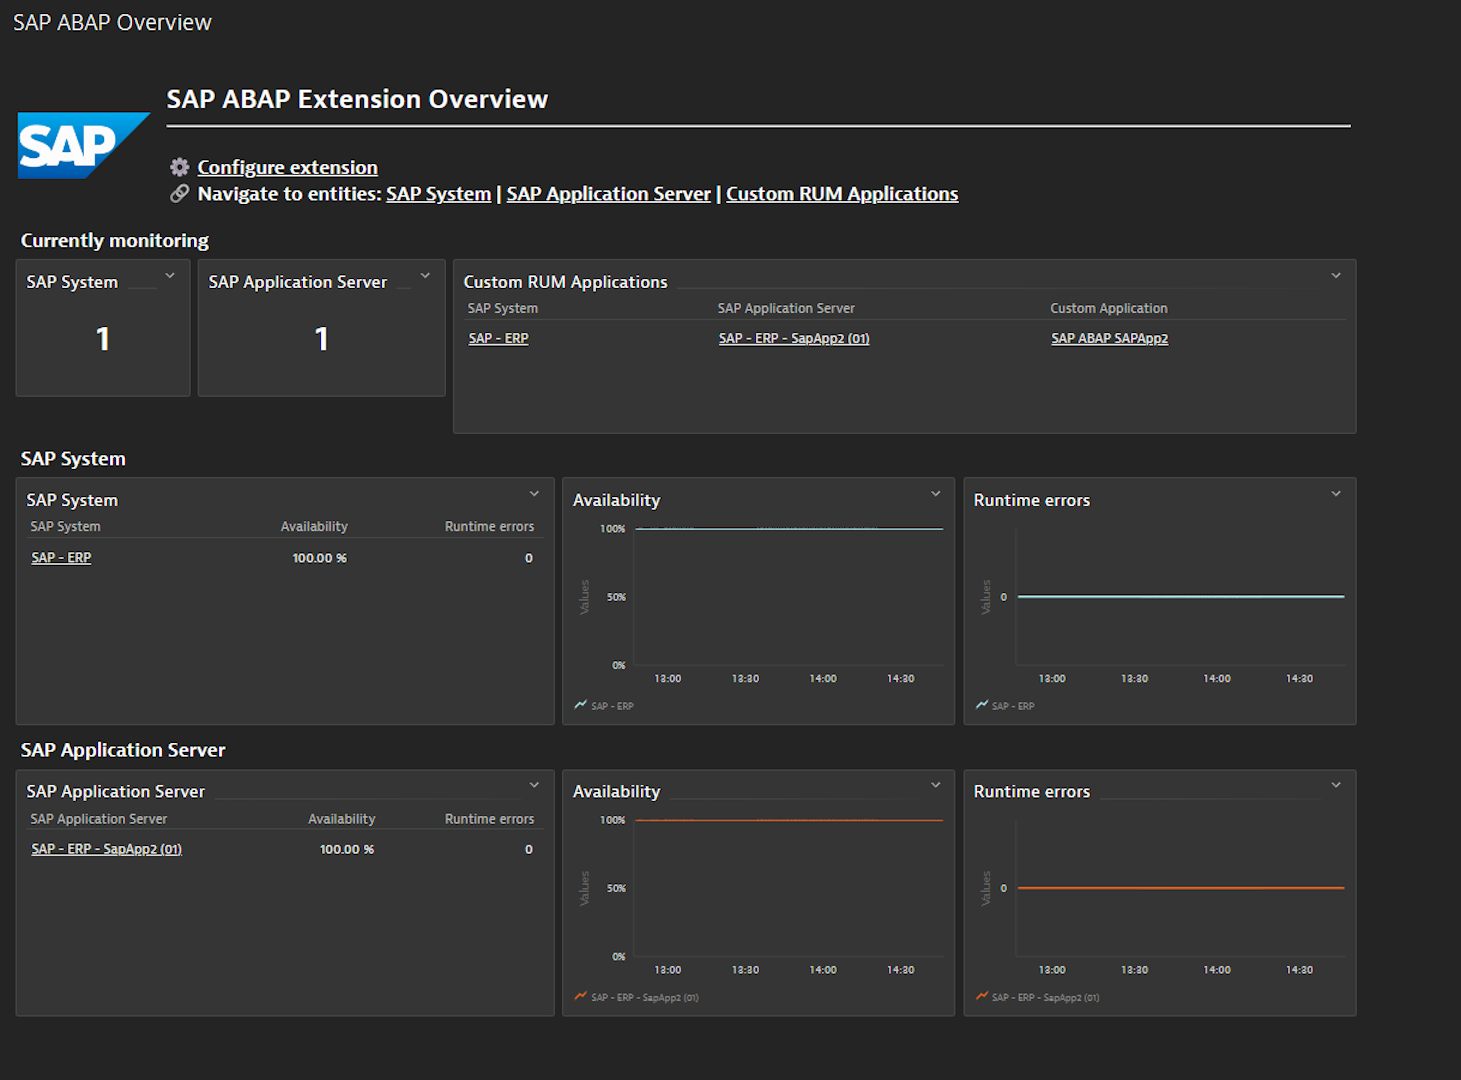 SAP ABAP Overview Dashboard, showing Monitored Systems and high level metrics.